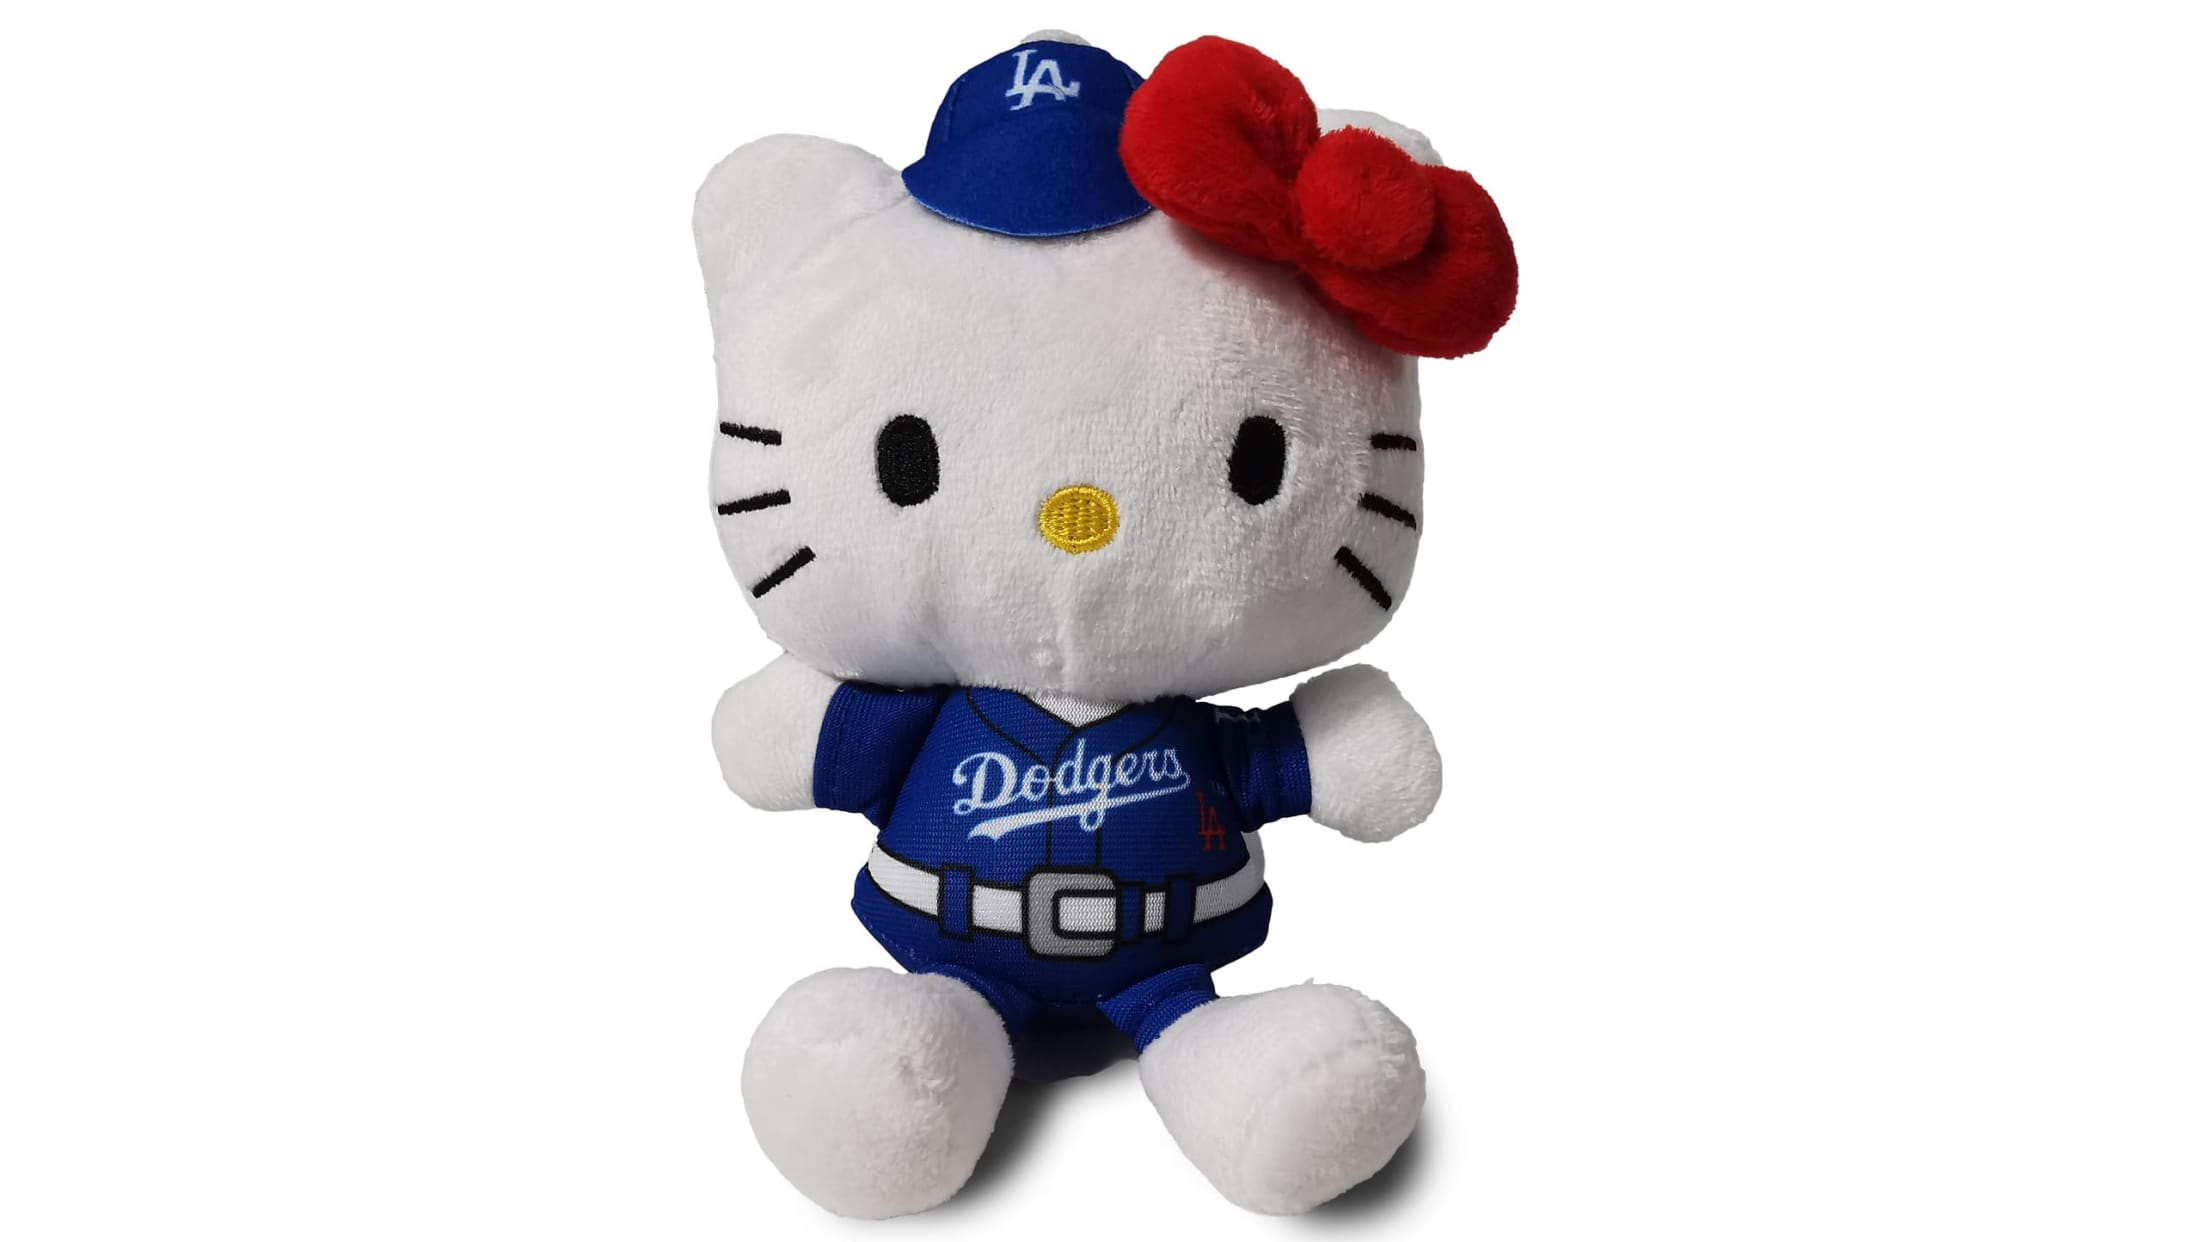 Products from the New Hello Kitty x MLB Collection